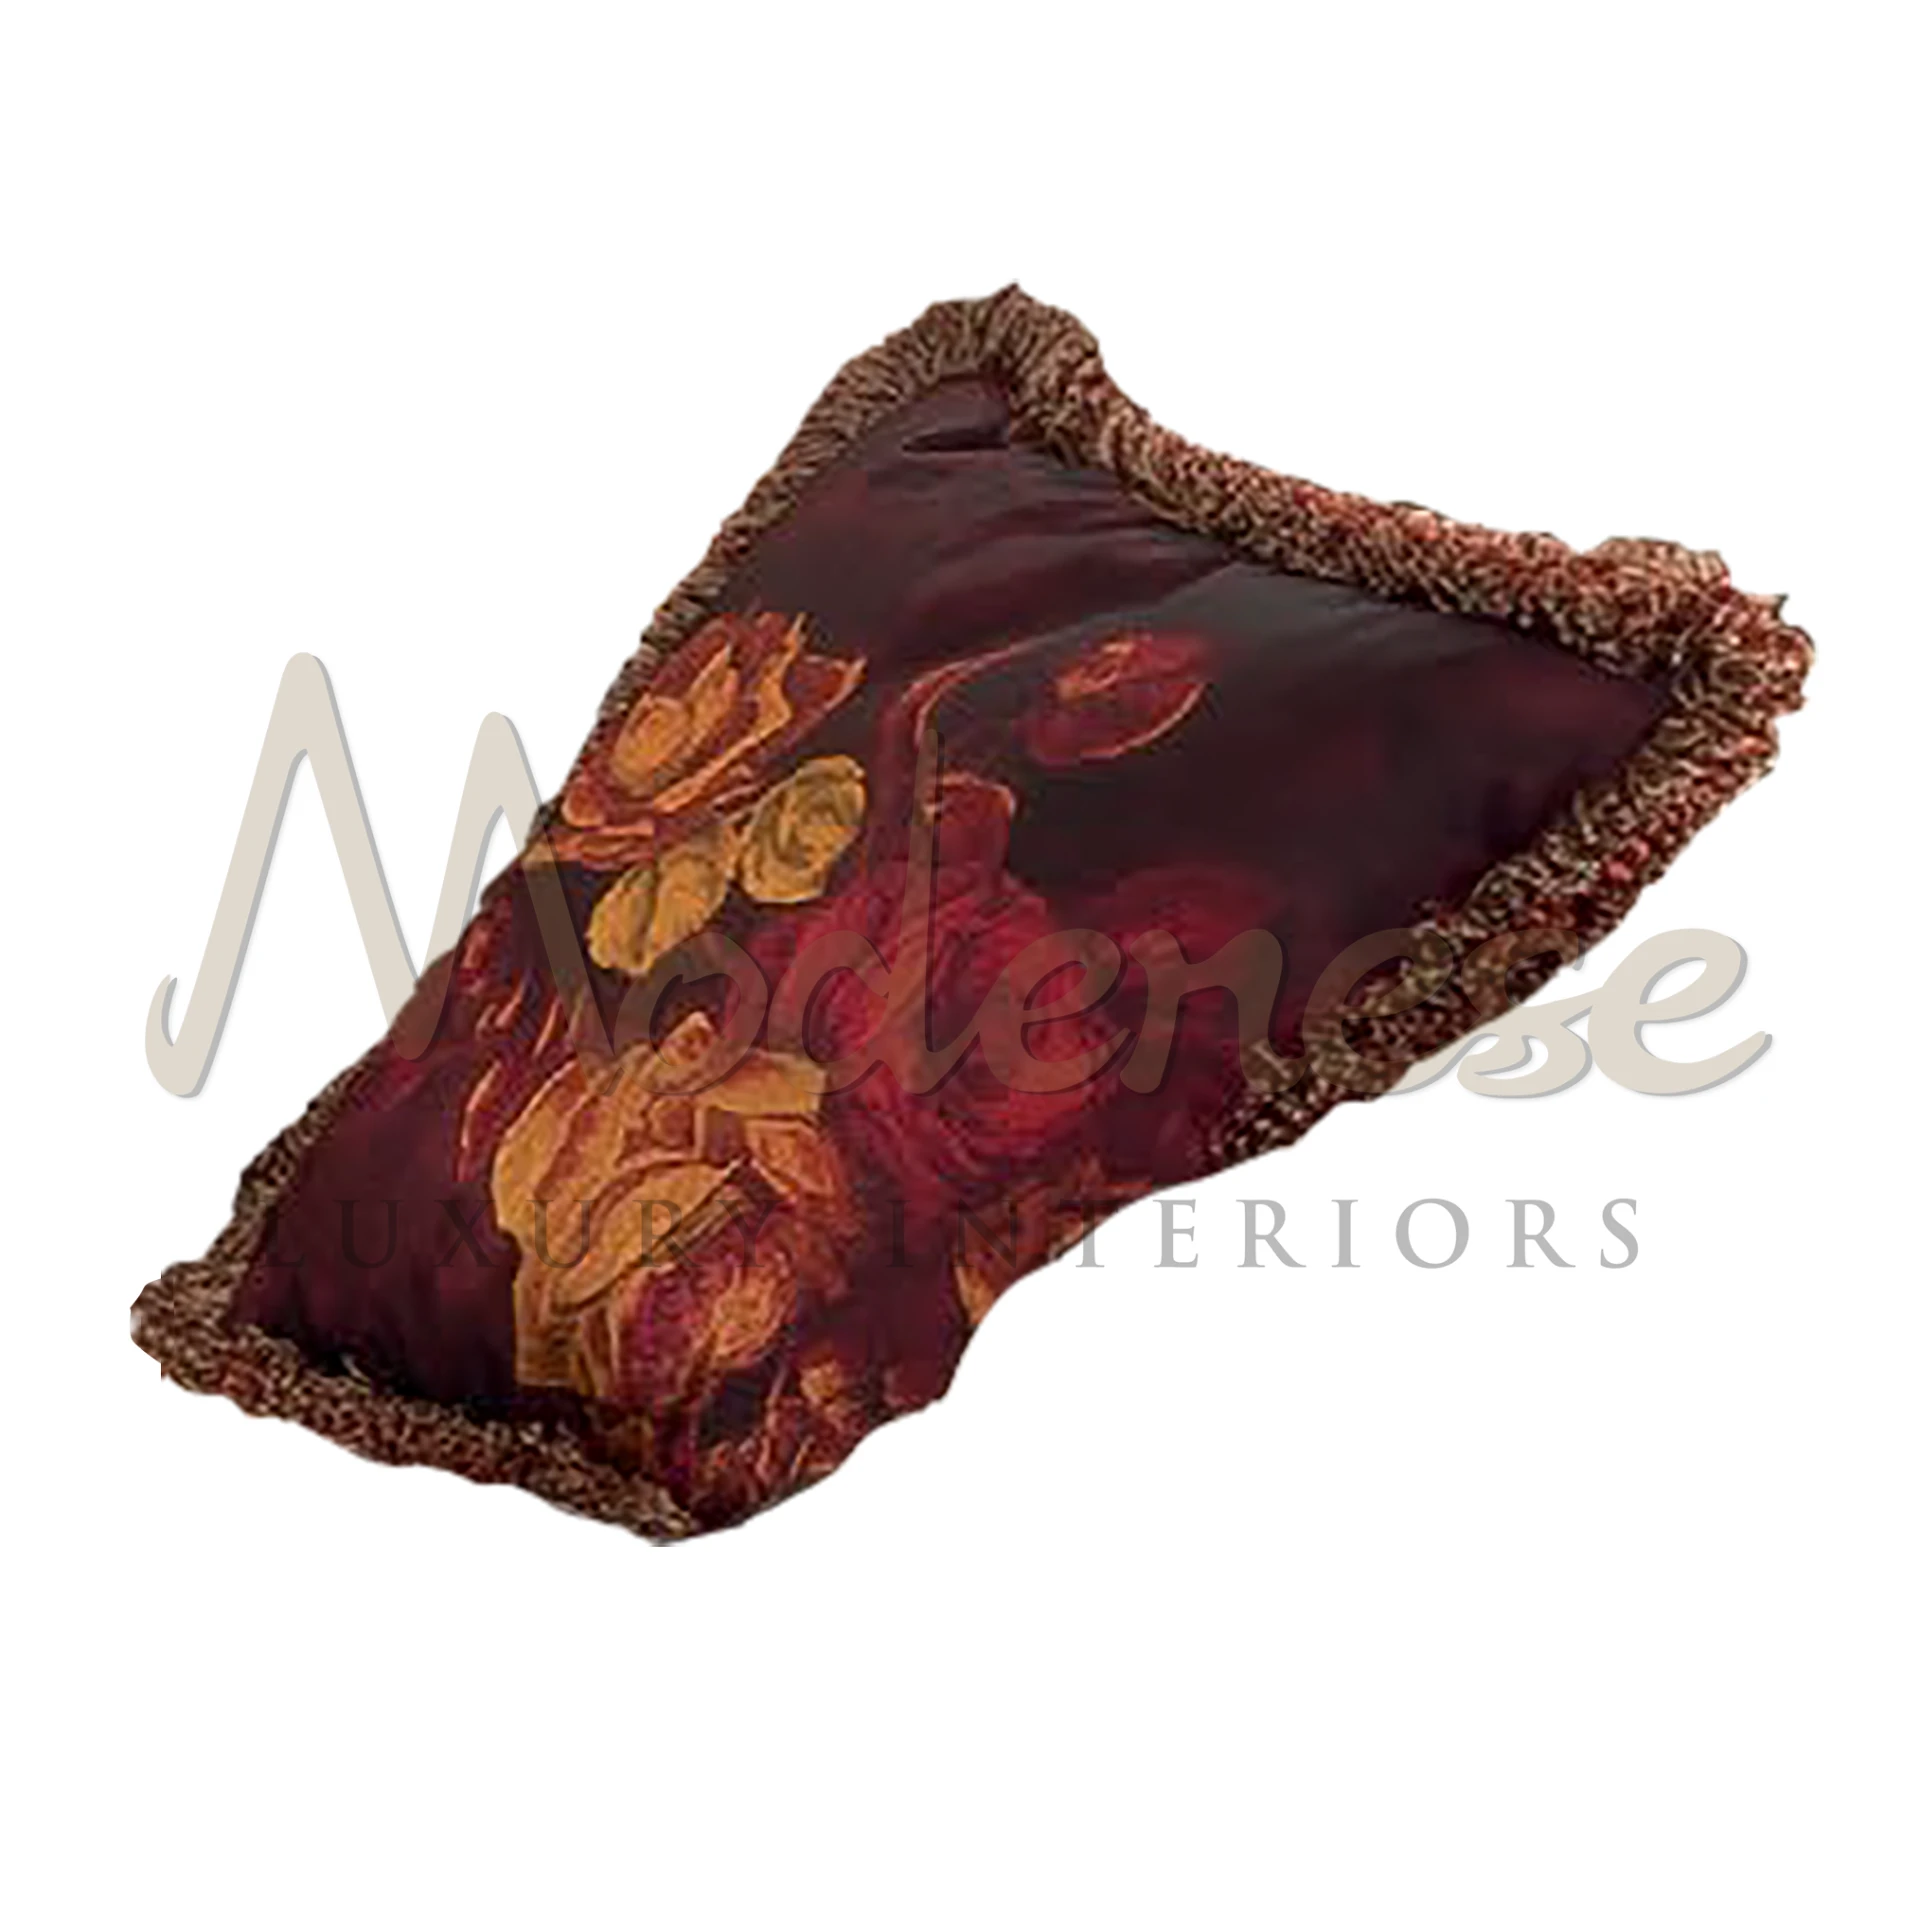 Classical Designer Pillow: Exuding timeless elegance and refined beauty, perfect for adding a luxurious touch to any room.